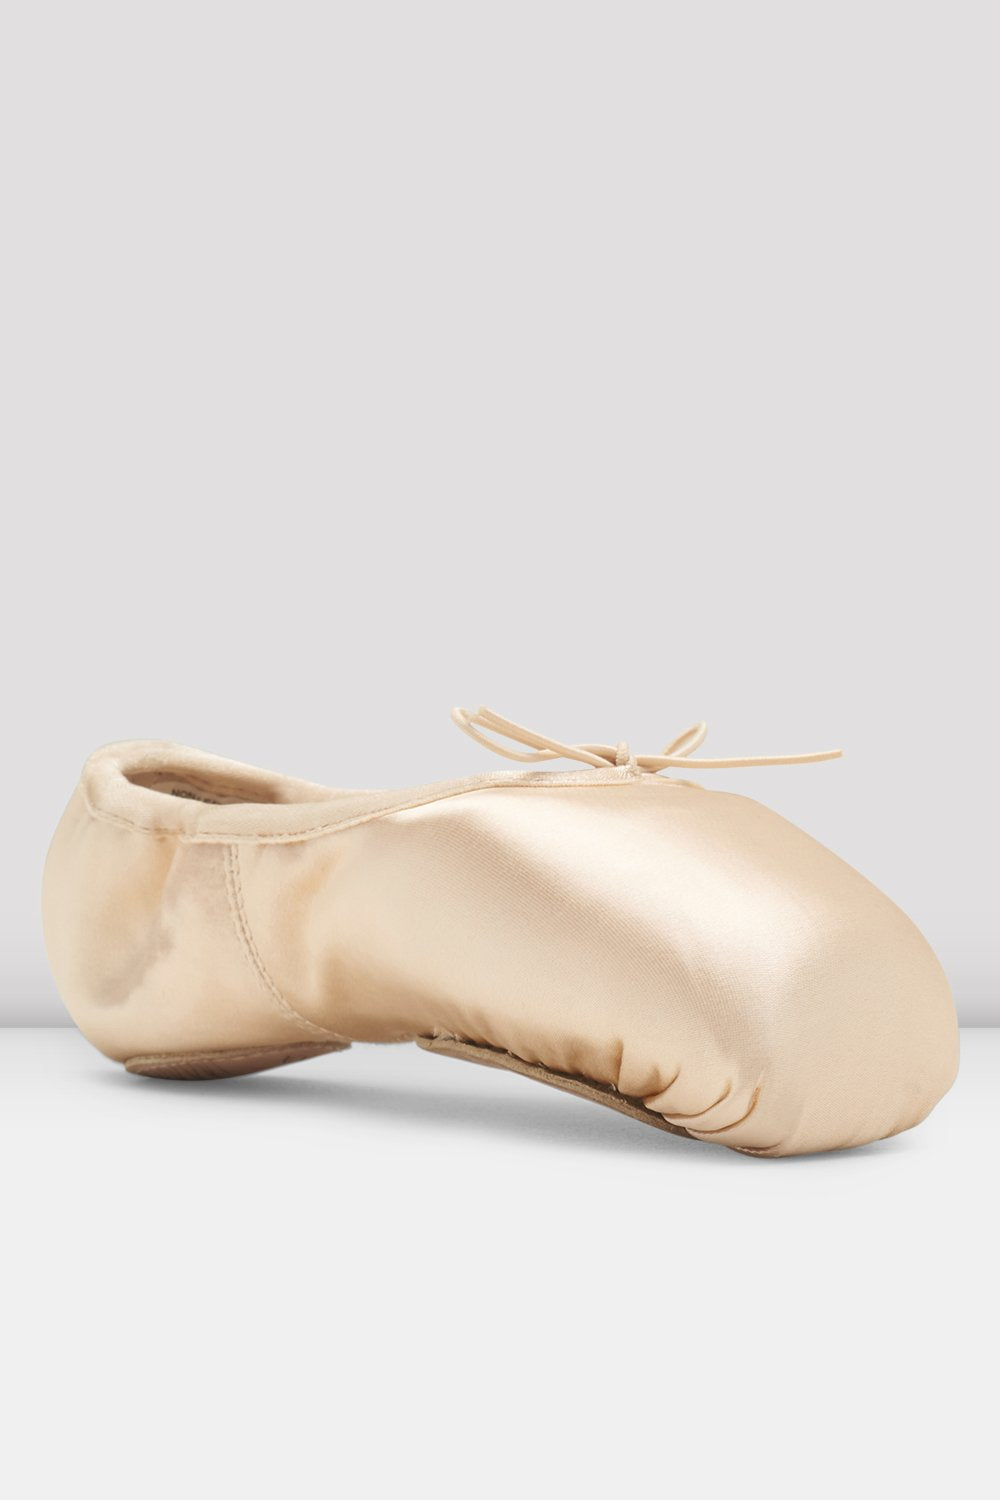 Bloch Stretch Sewing Kit - The Dance Shop